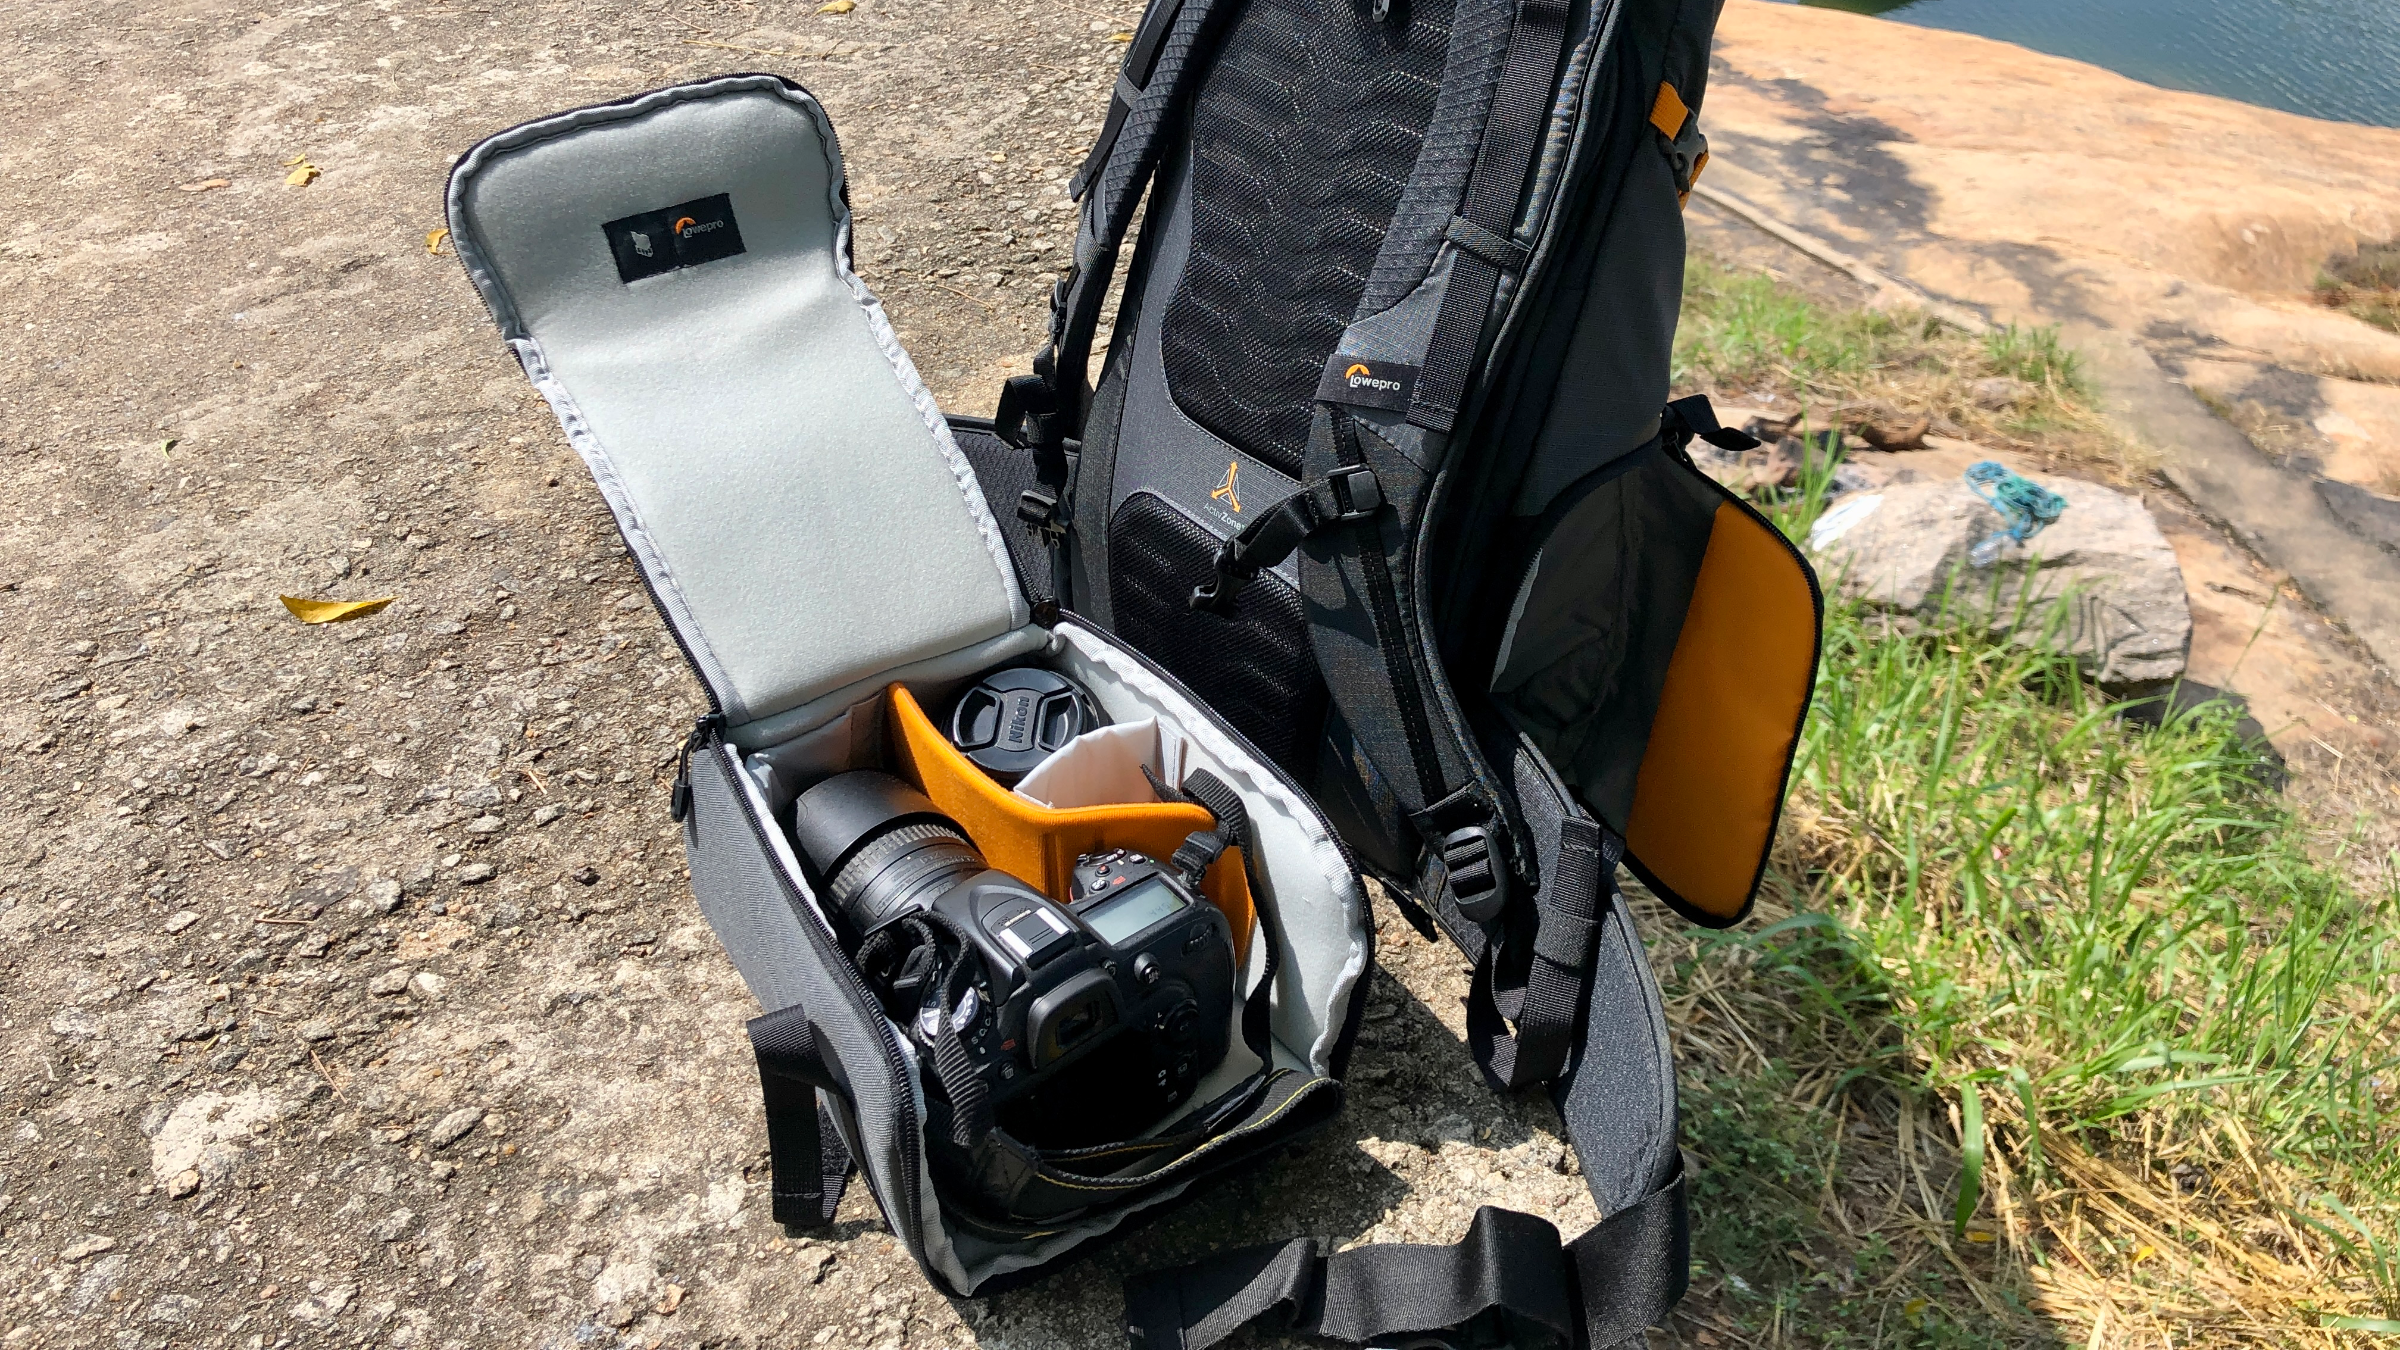 Lowepro PhotoSport Outdoor Backpack BP 24L AW III